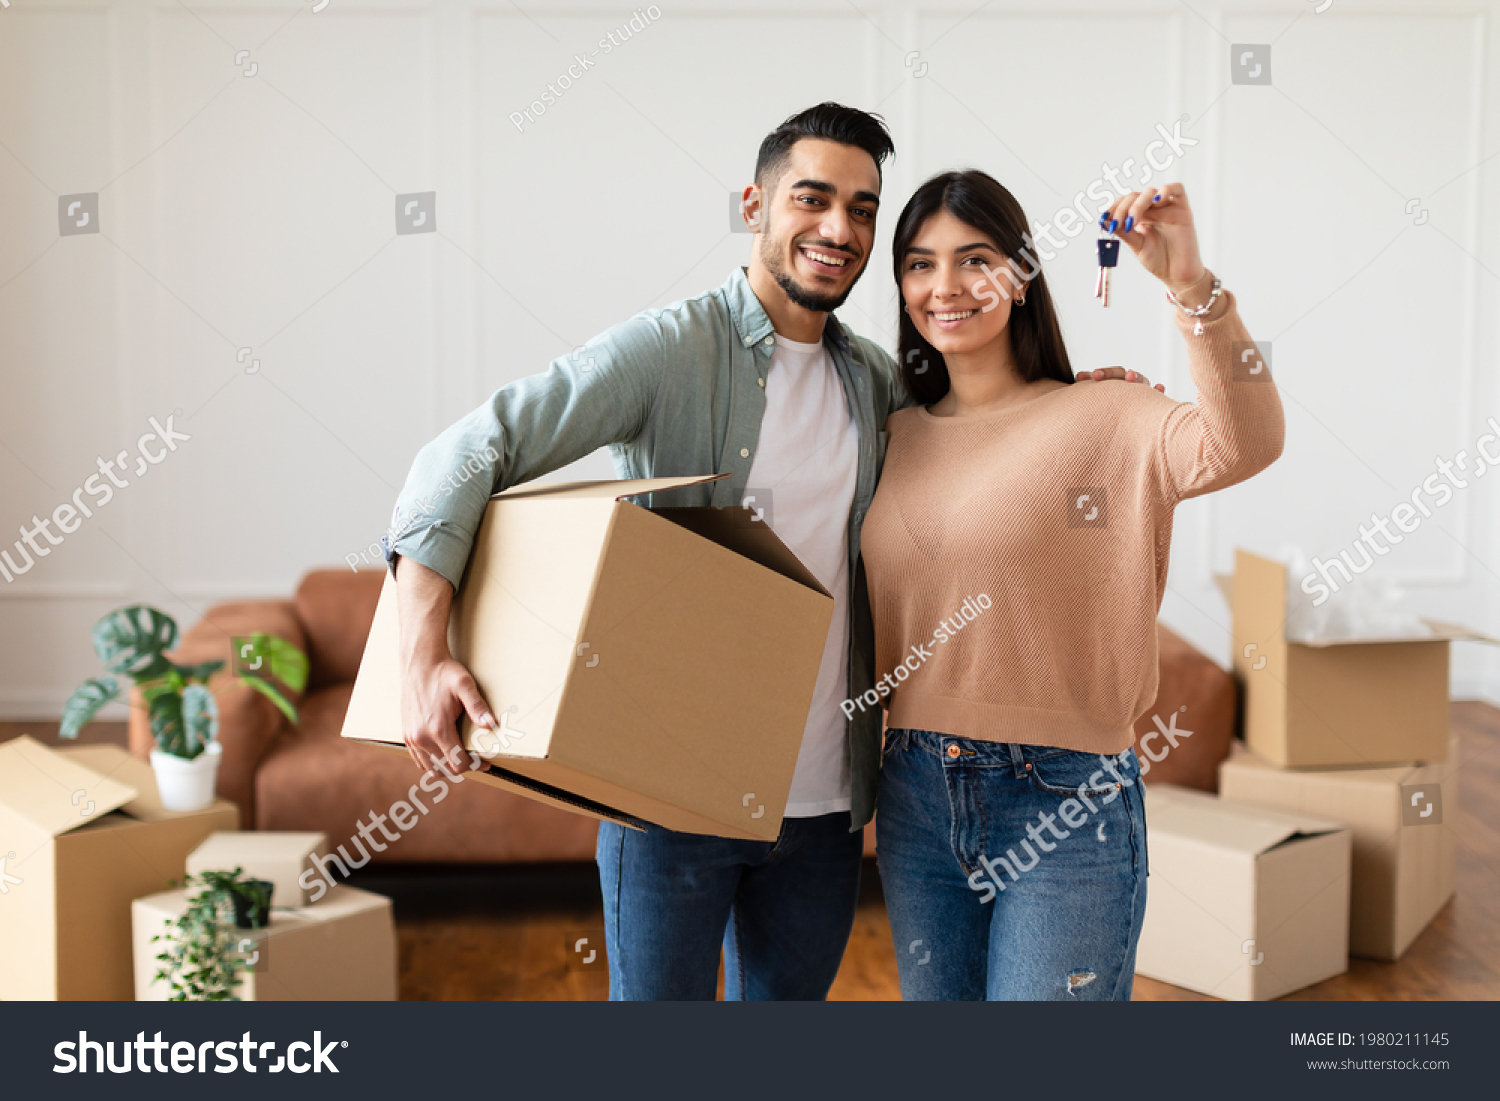 House Ownership. Young Couple Showing Keys And Holding Cardboard Box, Cheerful Guy And Lady Hugging After Moving In New Apartment Standing In Living Room. Insurance, Real Estate, Mortgage Concept #1980211145